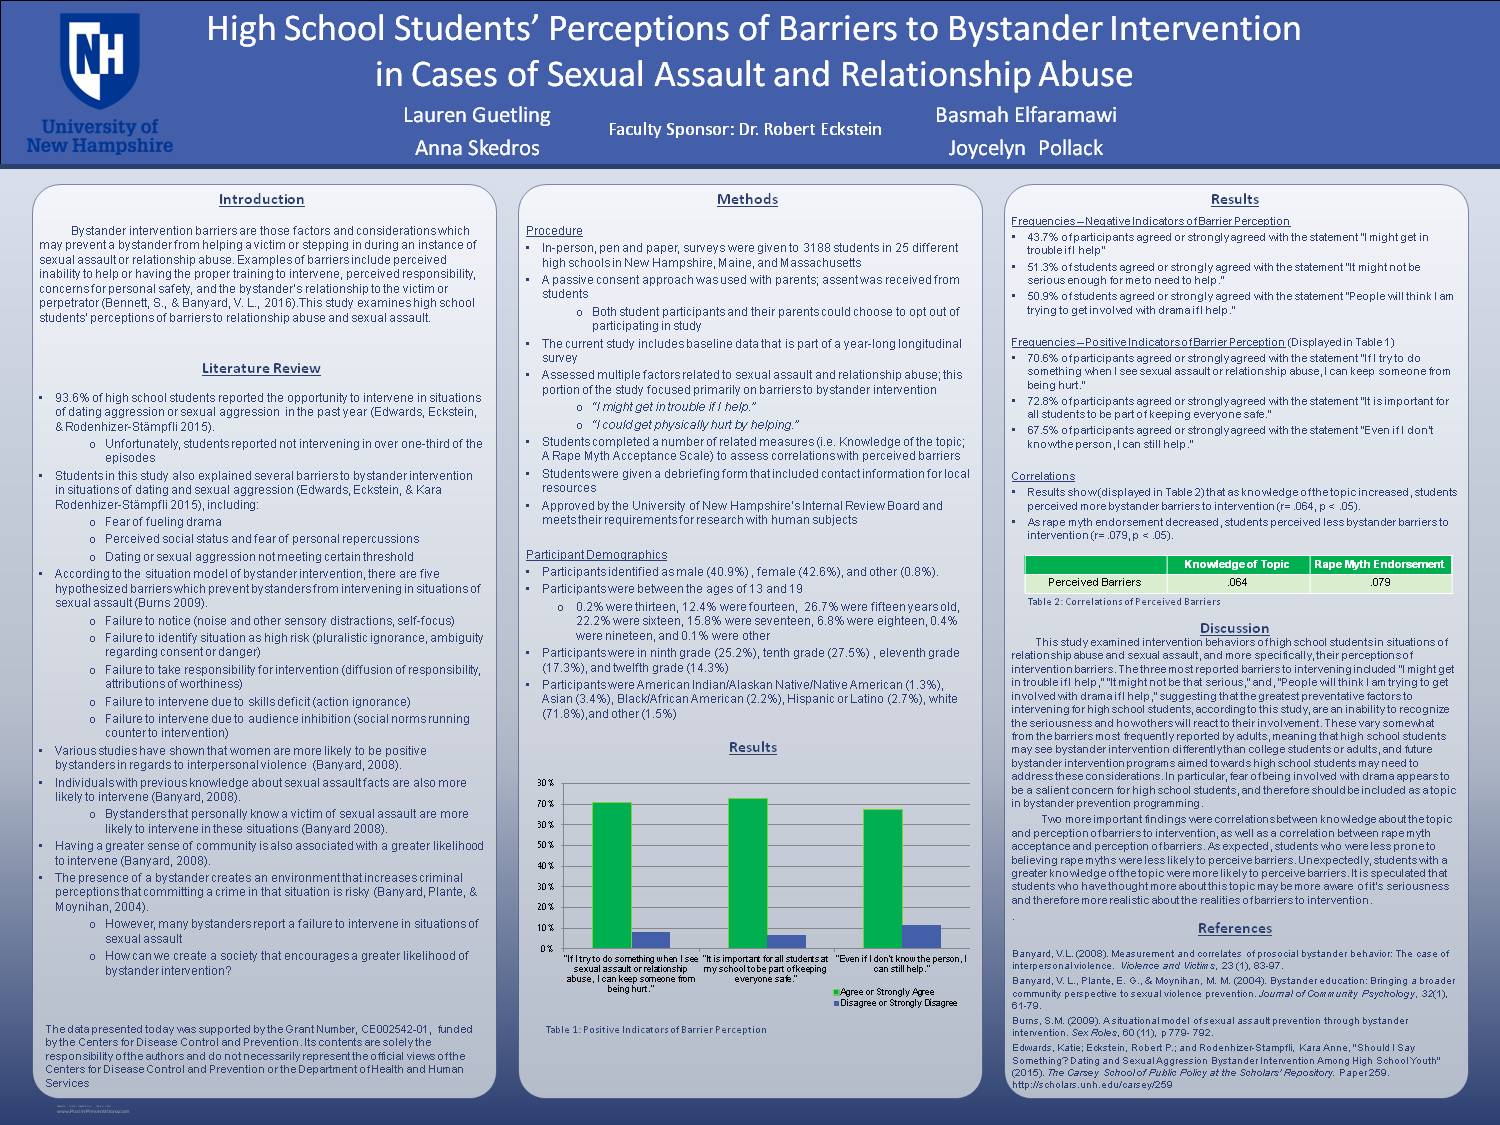 High School Students’ Perceptions Of Barriers To Bystander Intervention In Cases Of Sexual Assault And Relationship Abuse by bpe